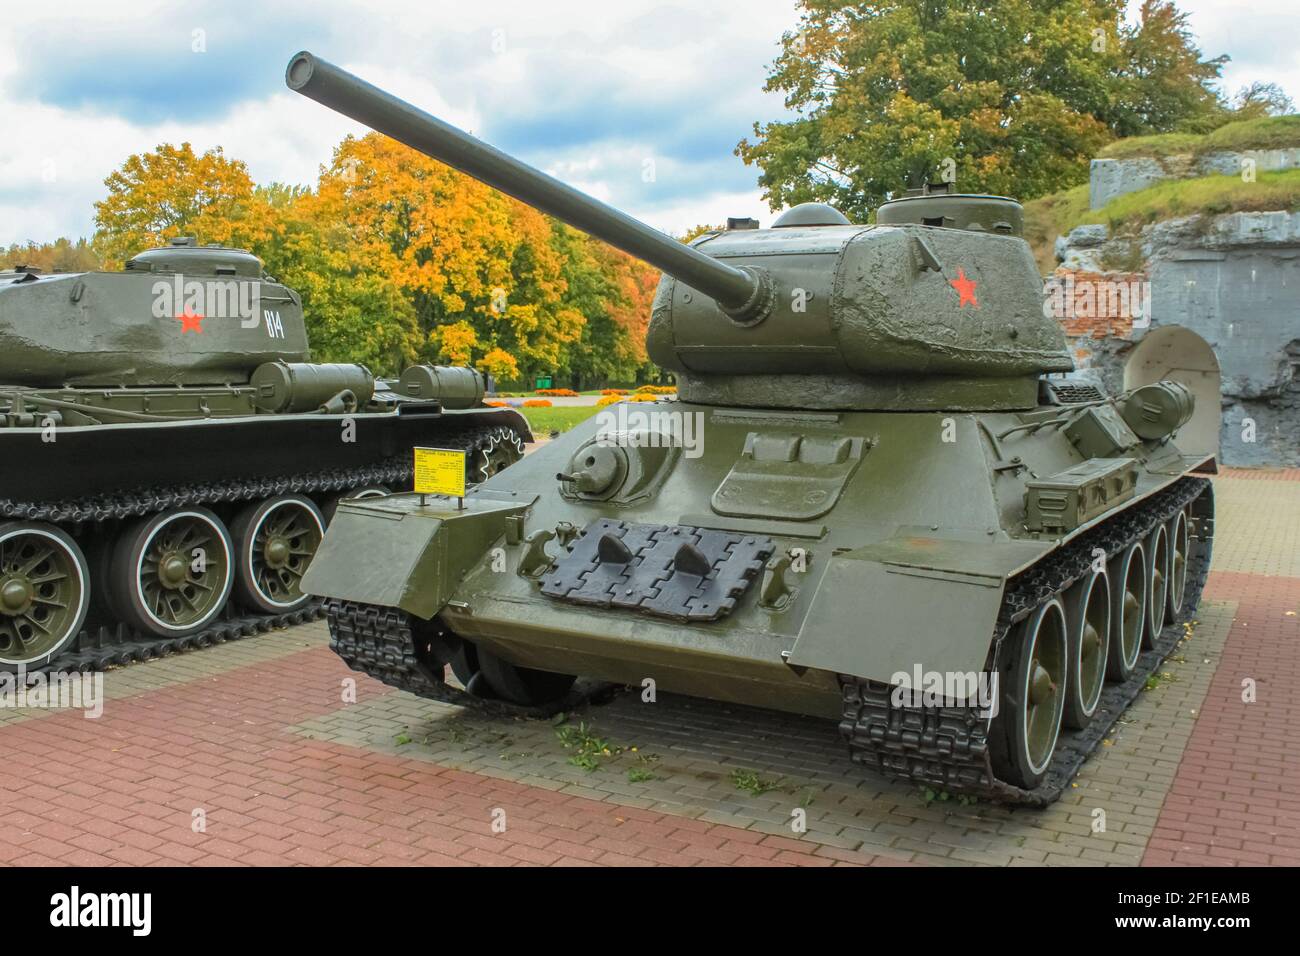 Brest, Belarus - October 5, 2012: Soviet T-34 tank of the latest modification with an 85-mm gun in the Brest Fortress memorial complex Stock Photo